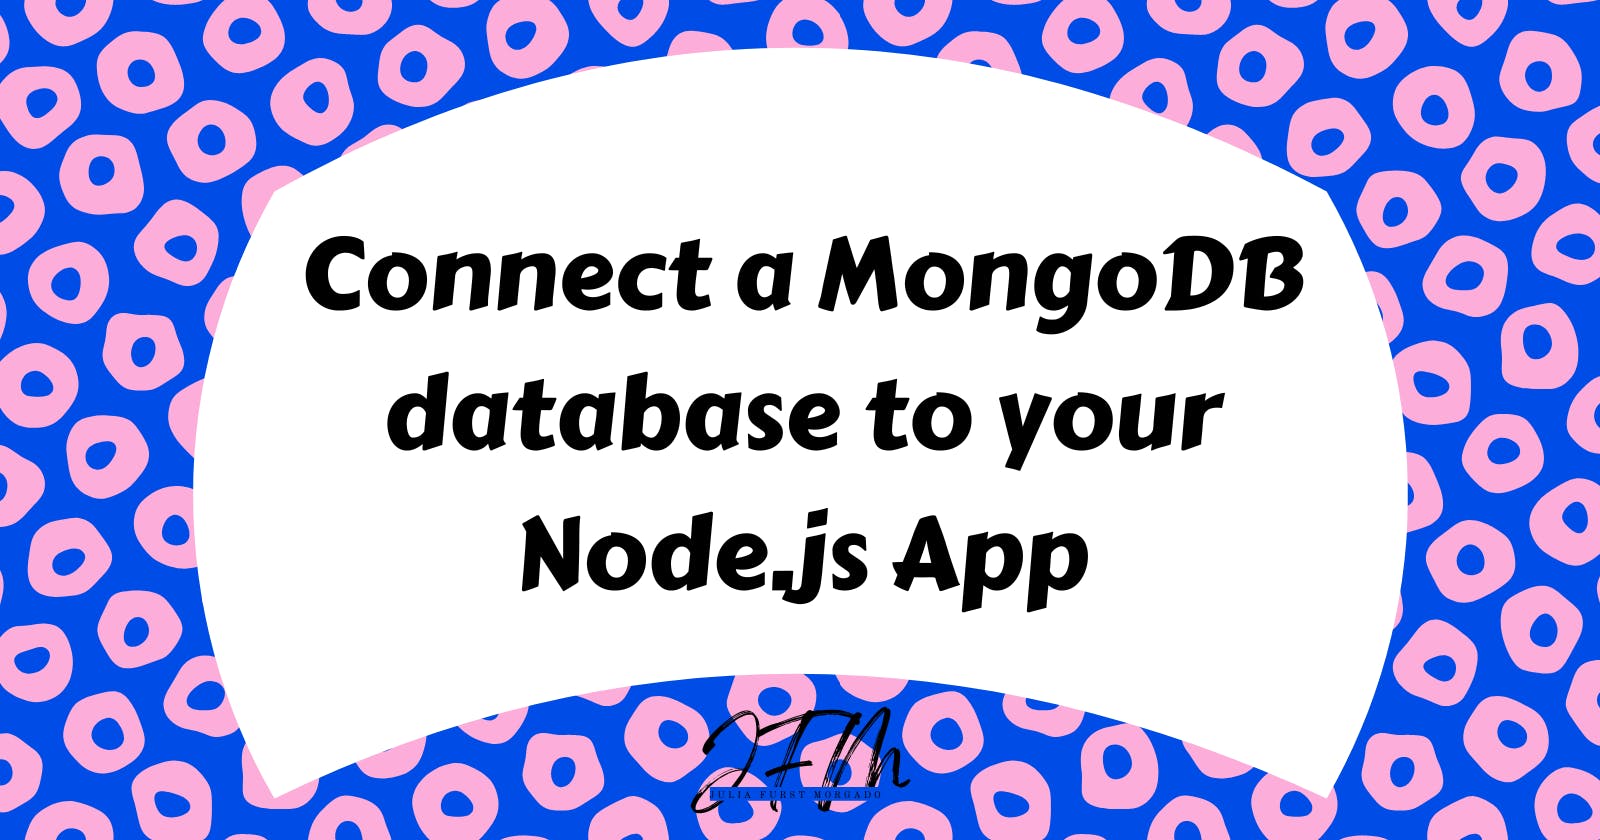 Connecting MongoDB to your app using Node.js